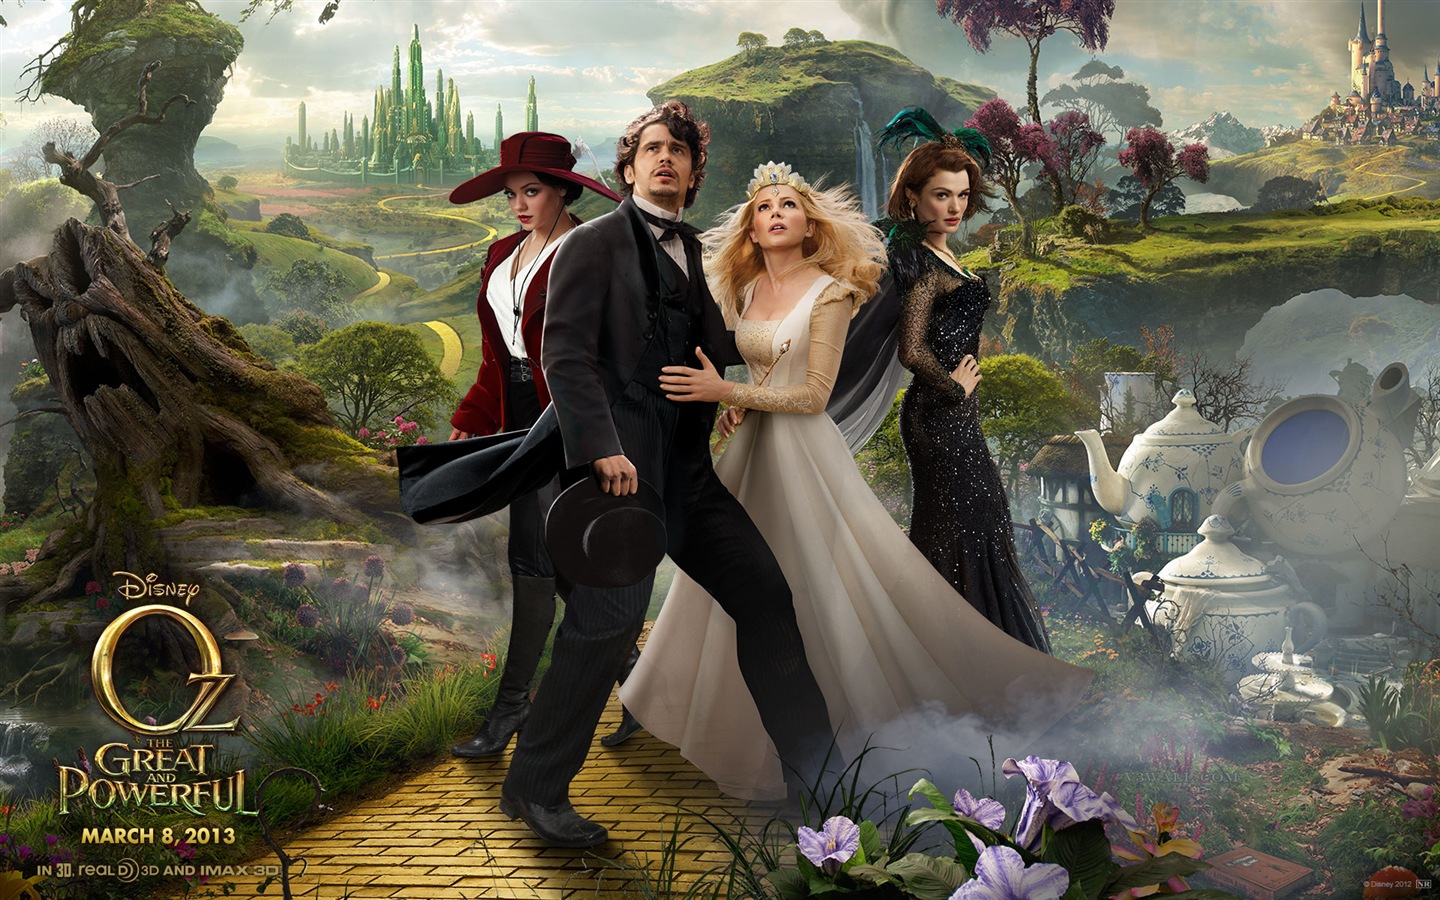 Oz The Great and Powerful 2013 HD wallpapers #1 - 1440x900